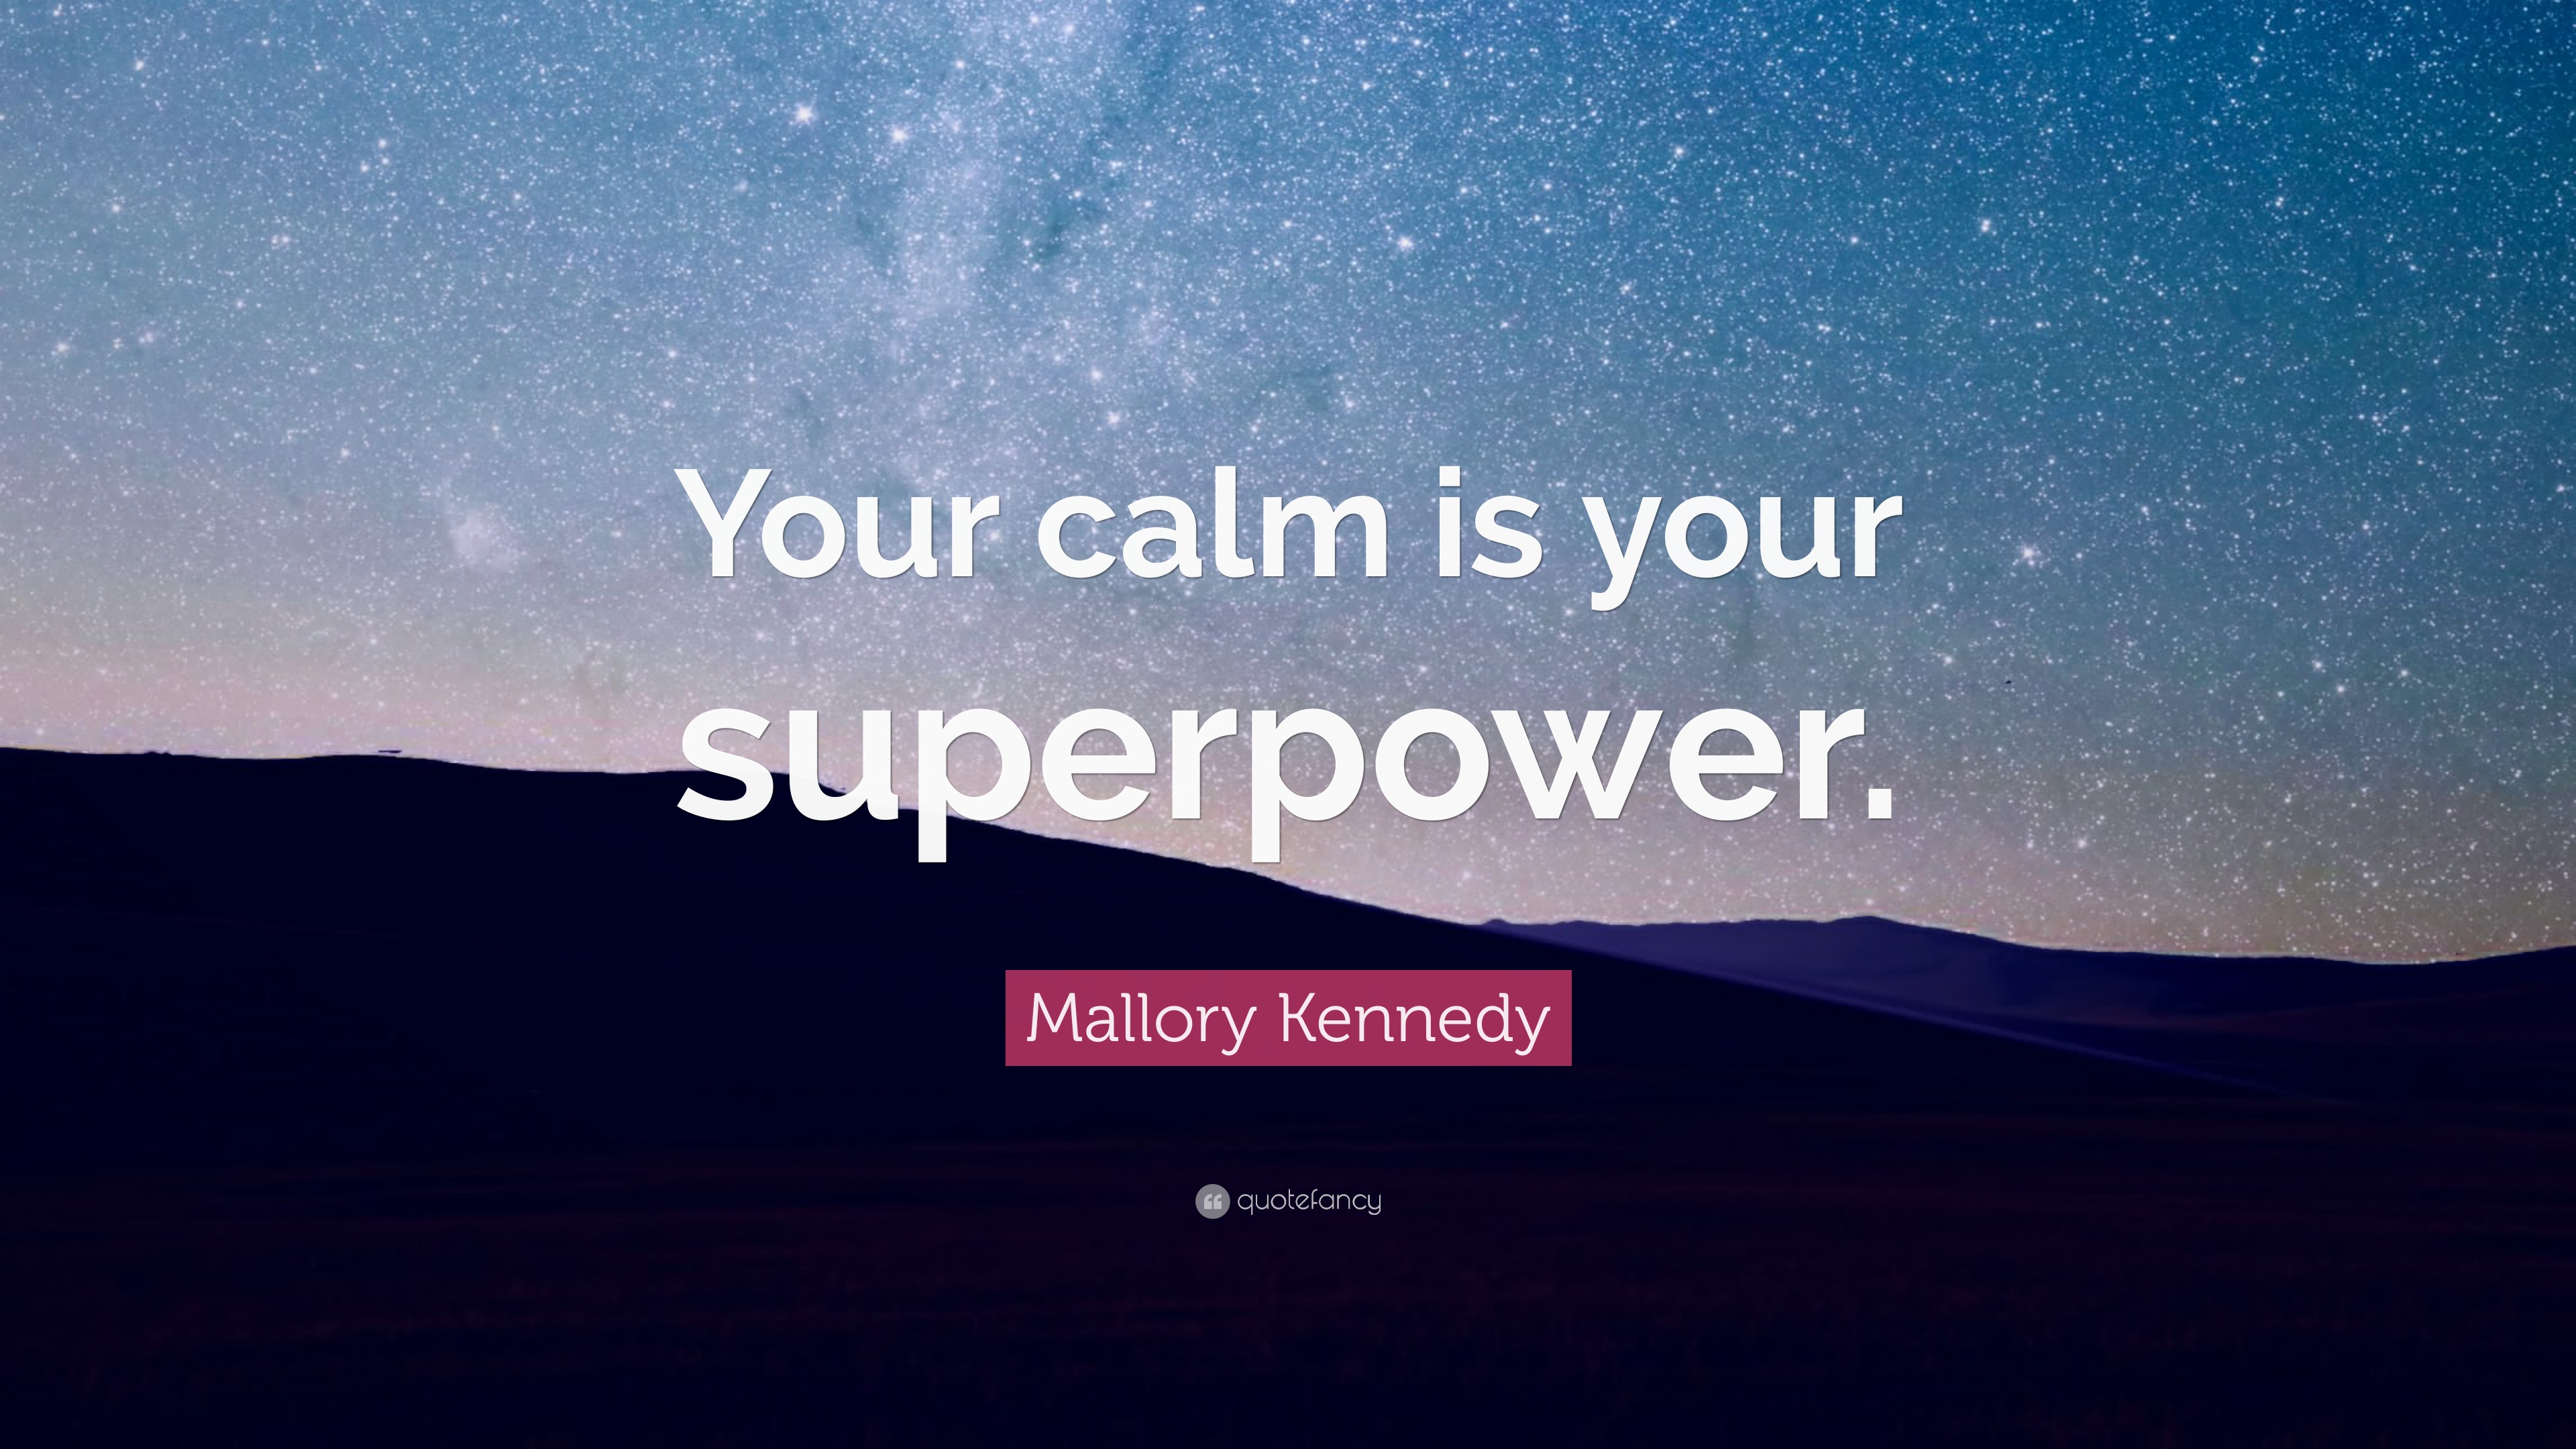 Mallory Kennedy Quote: “Your calm is your superpower.”